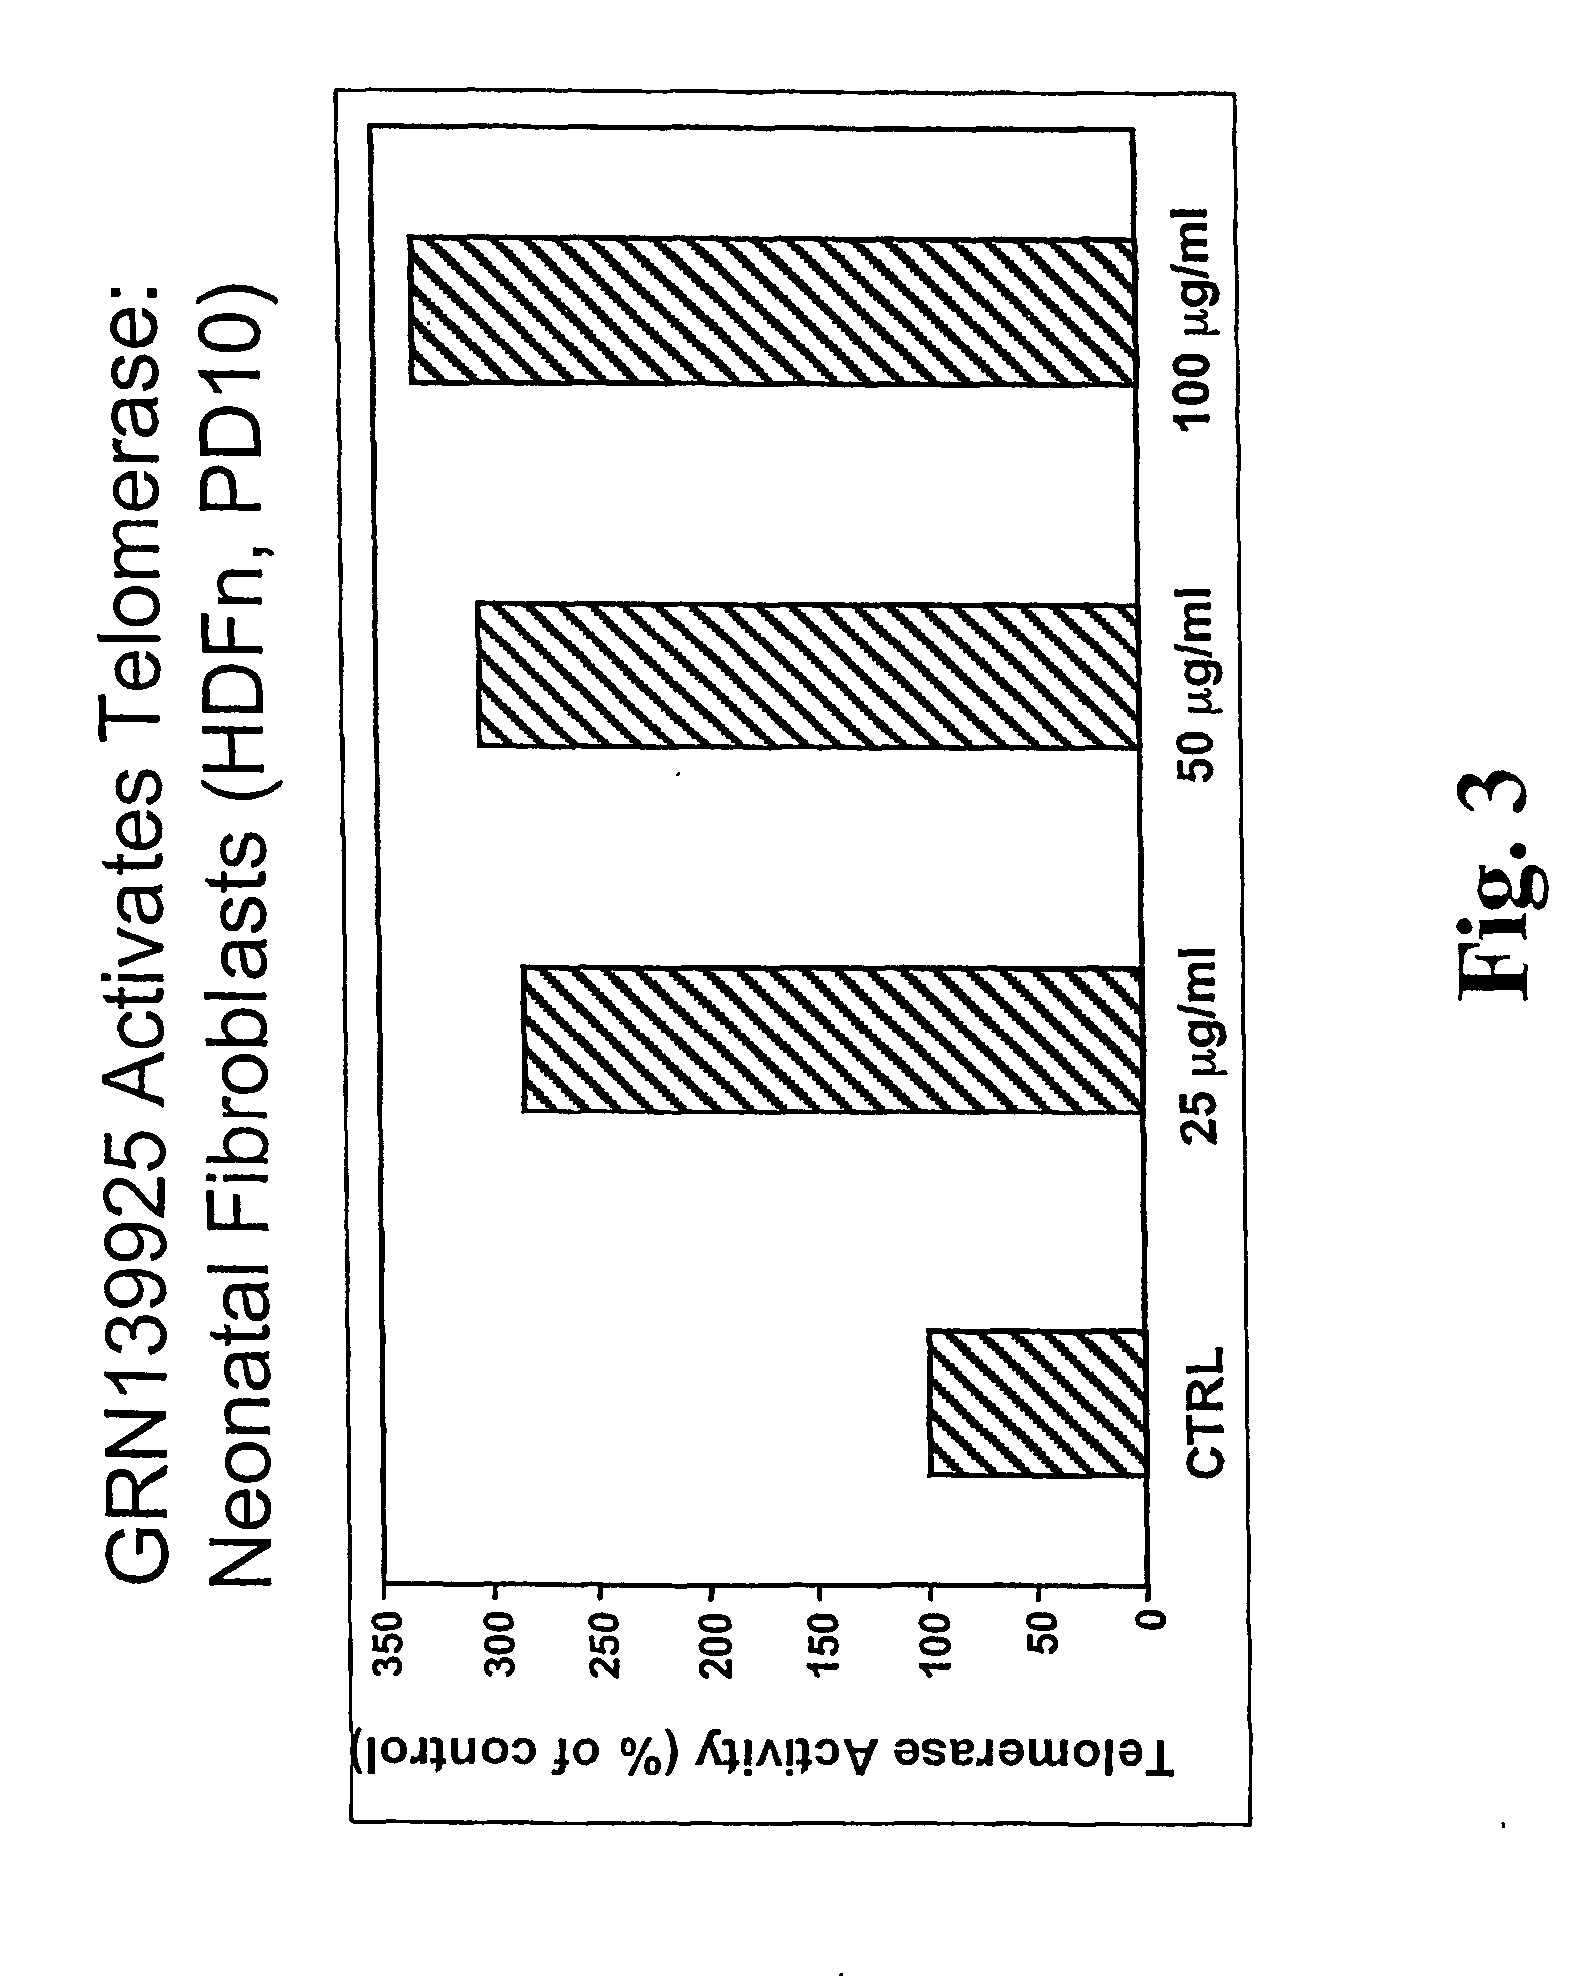 Formulations containing astragalus extracts and uses thereof